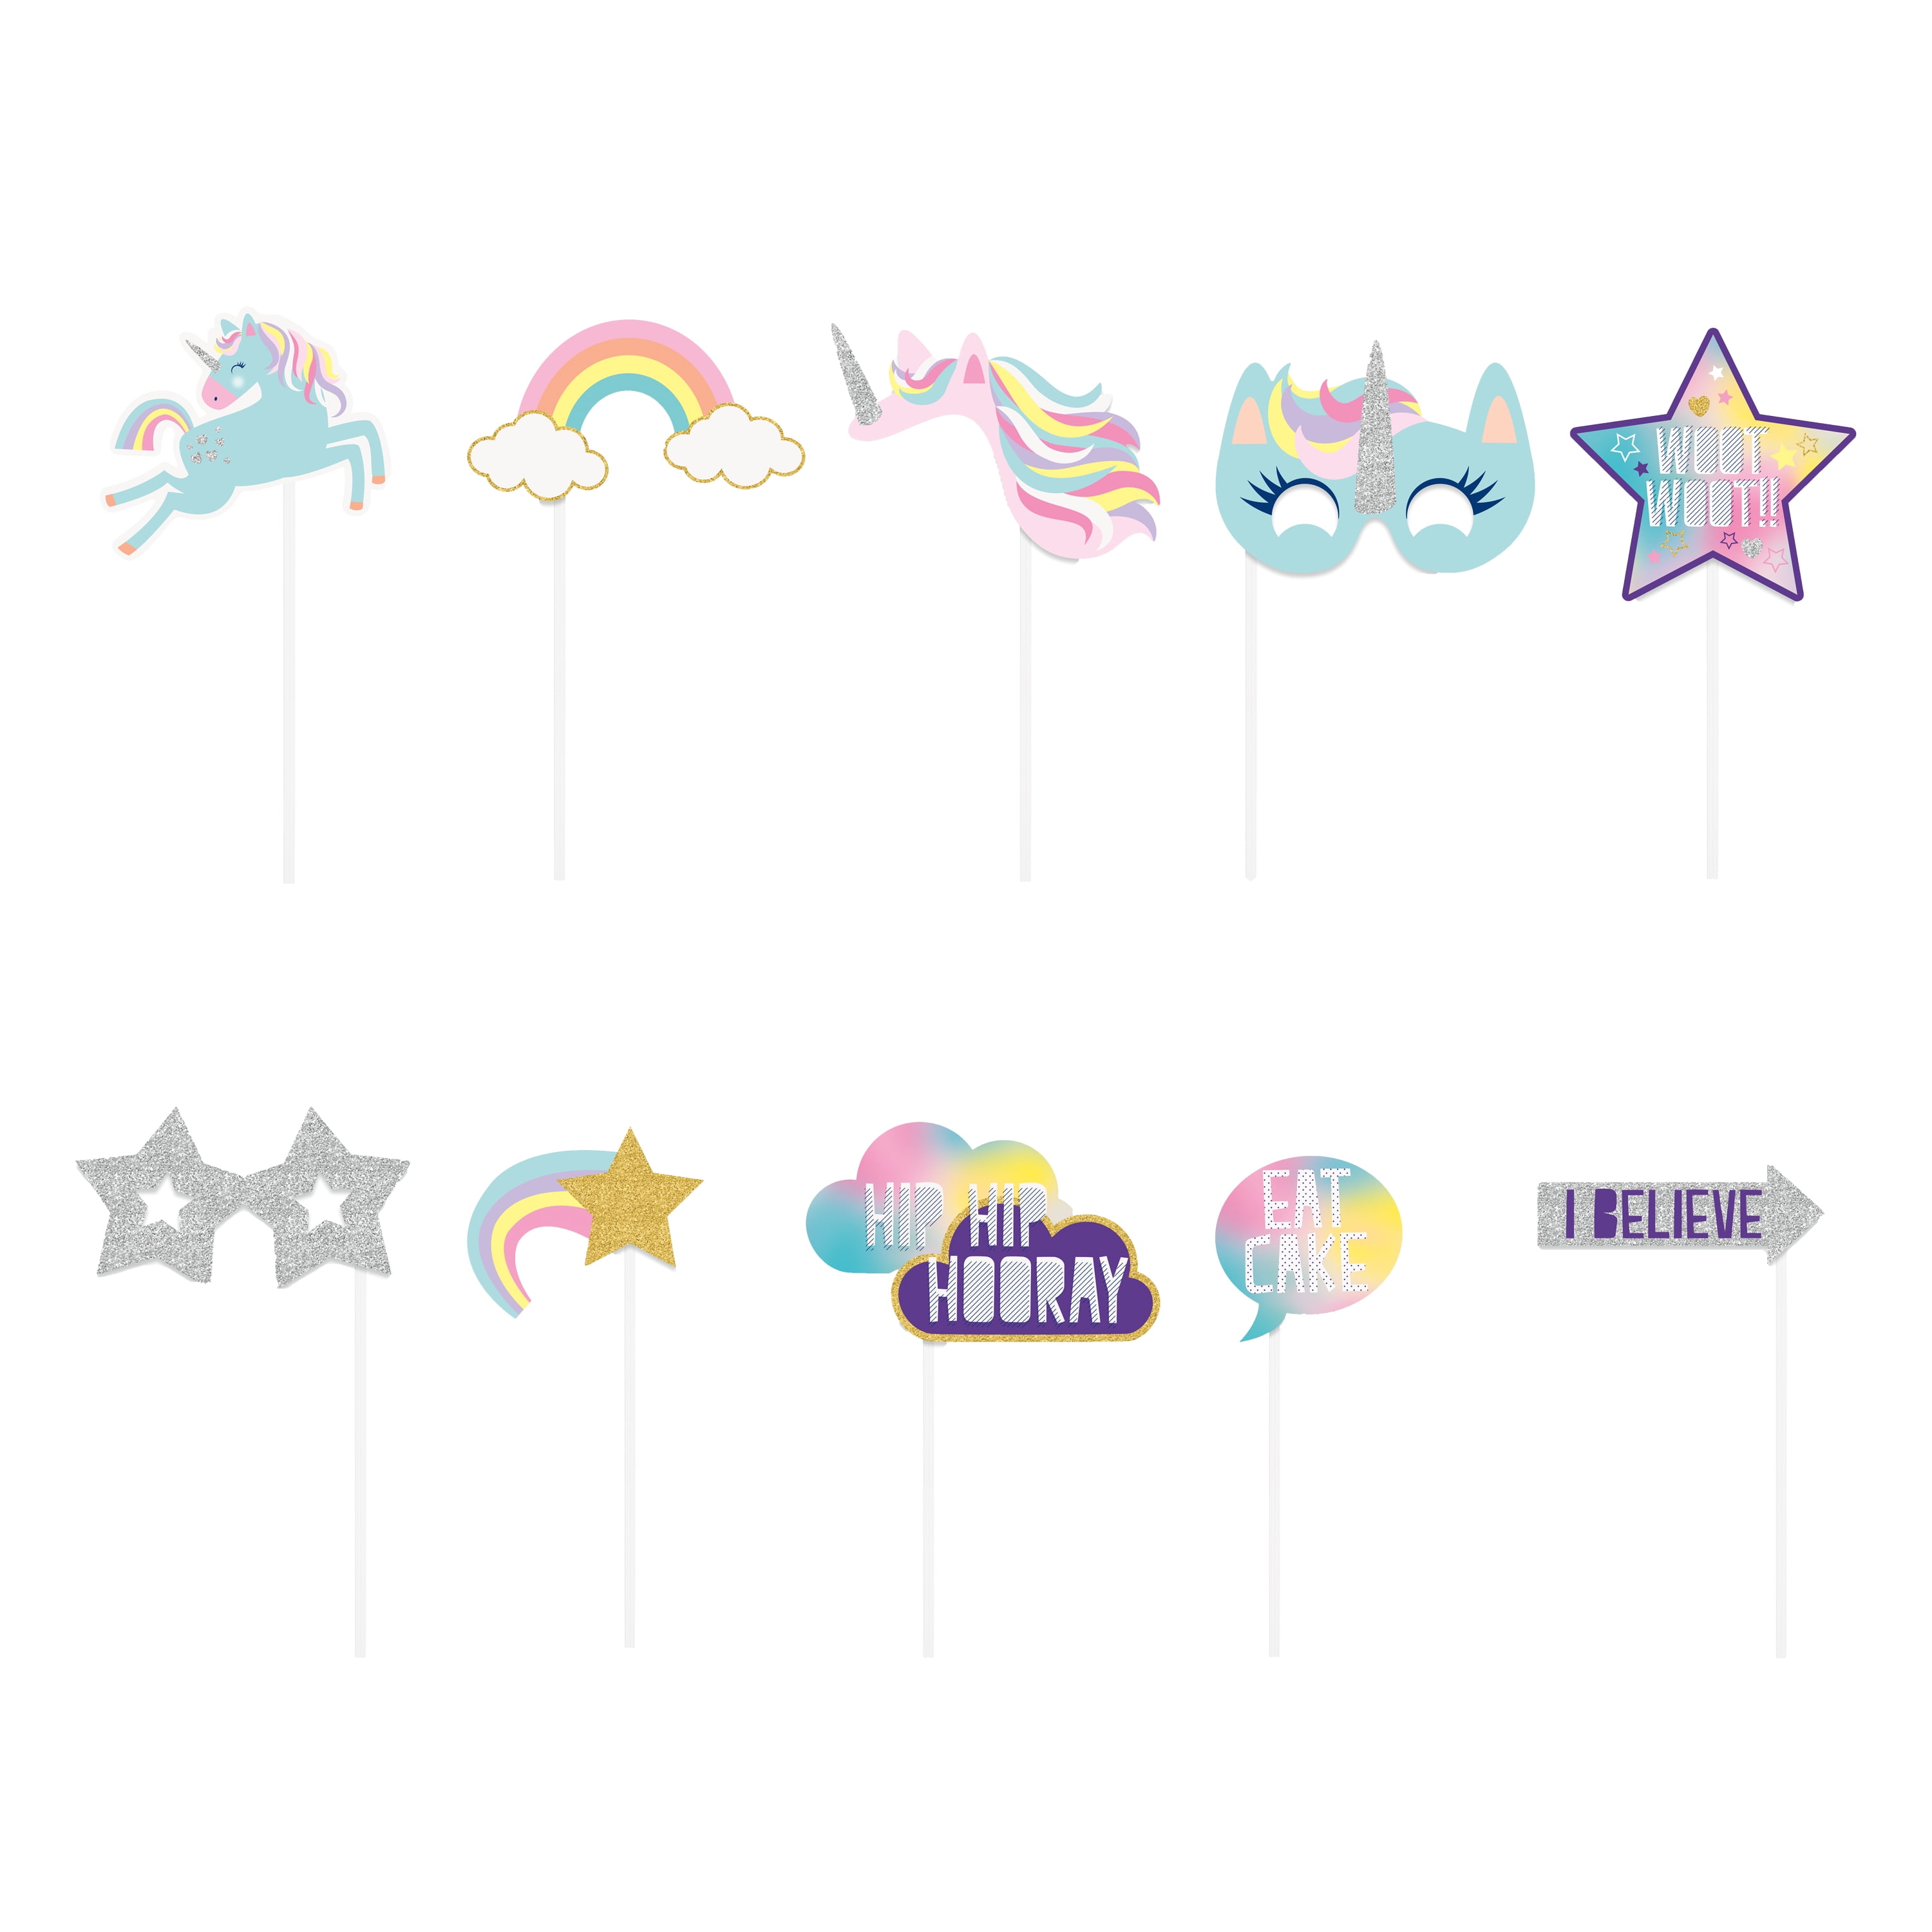 Unicorn Party Printable Sign Unicorn Party Photo Booth Props Sign Rainbow Unicorn Birthday Party Decorations Grab A Prop /& Strike a Pose